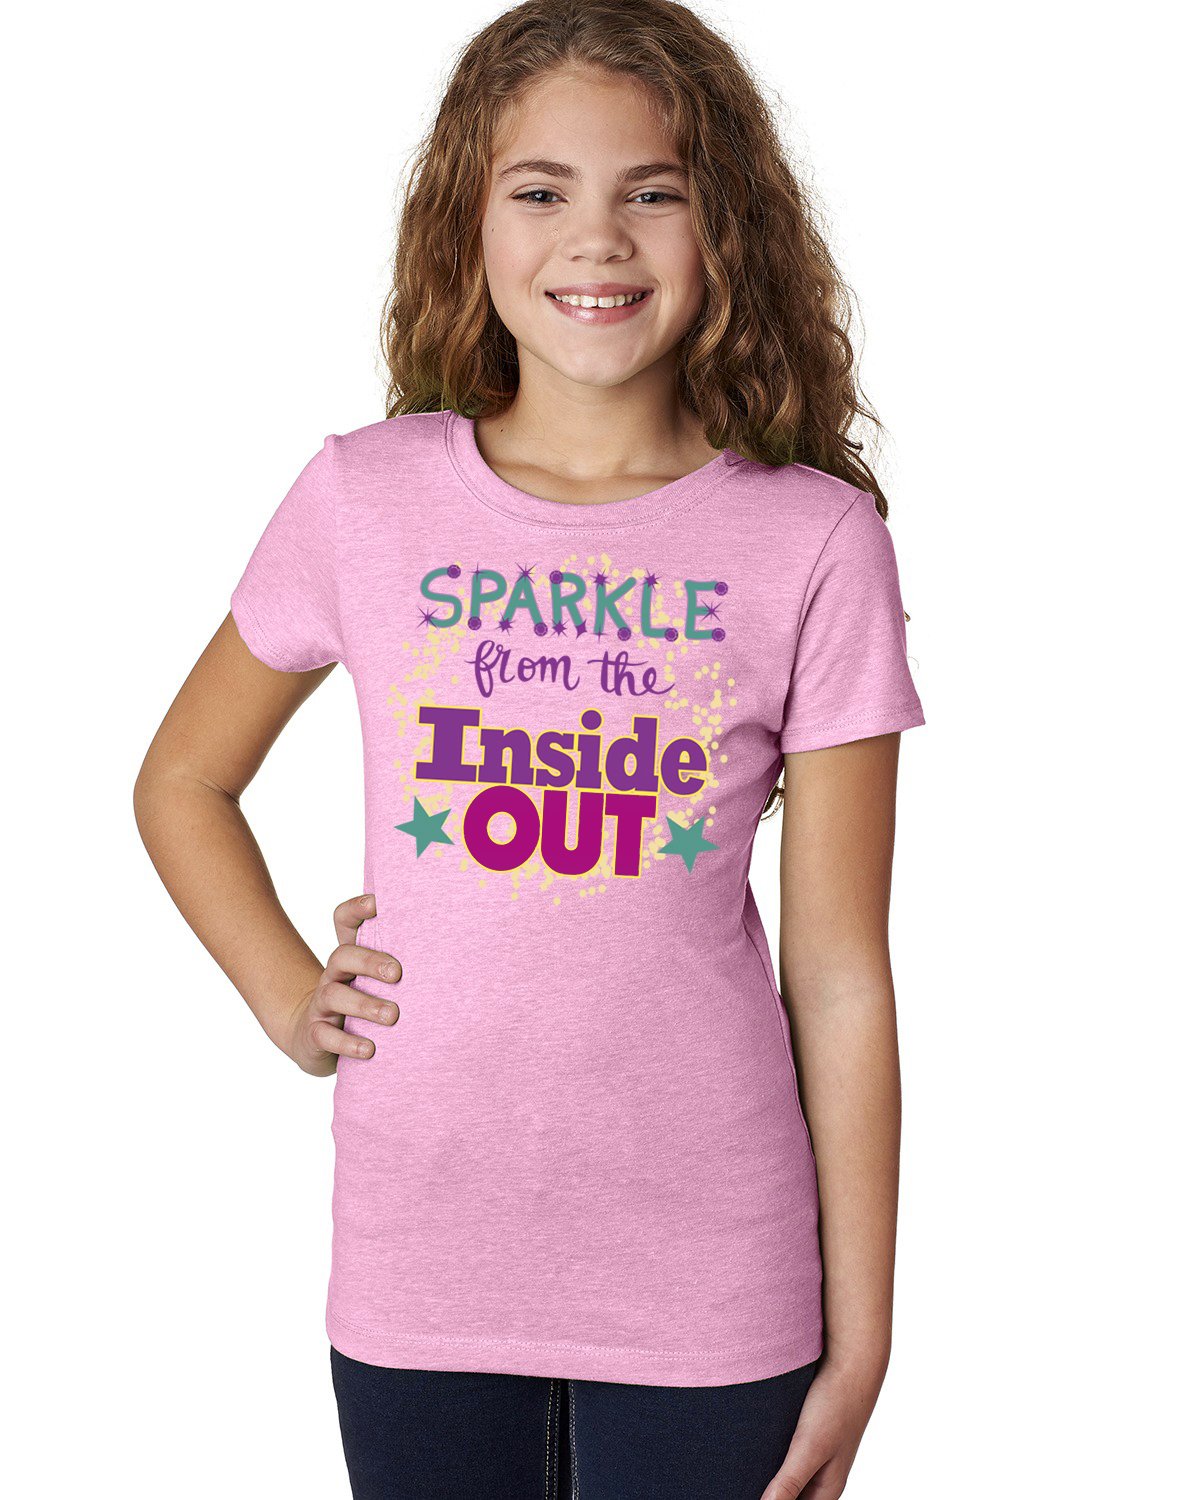 Beauty from the Inside Out' Women's Premium T-Shirt